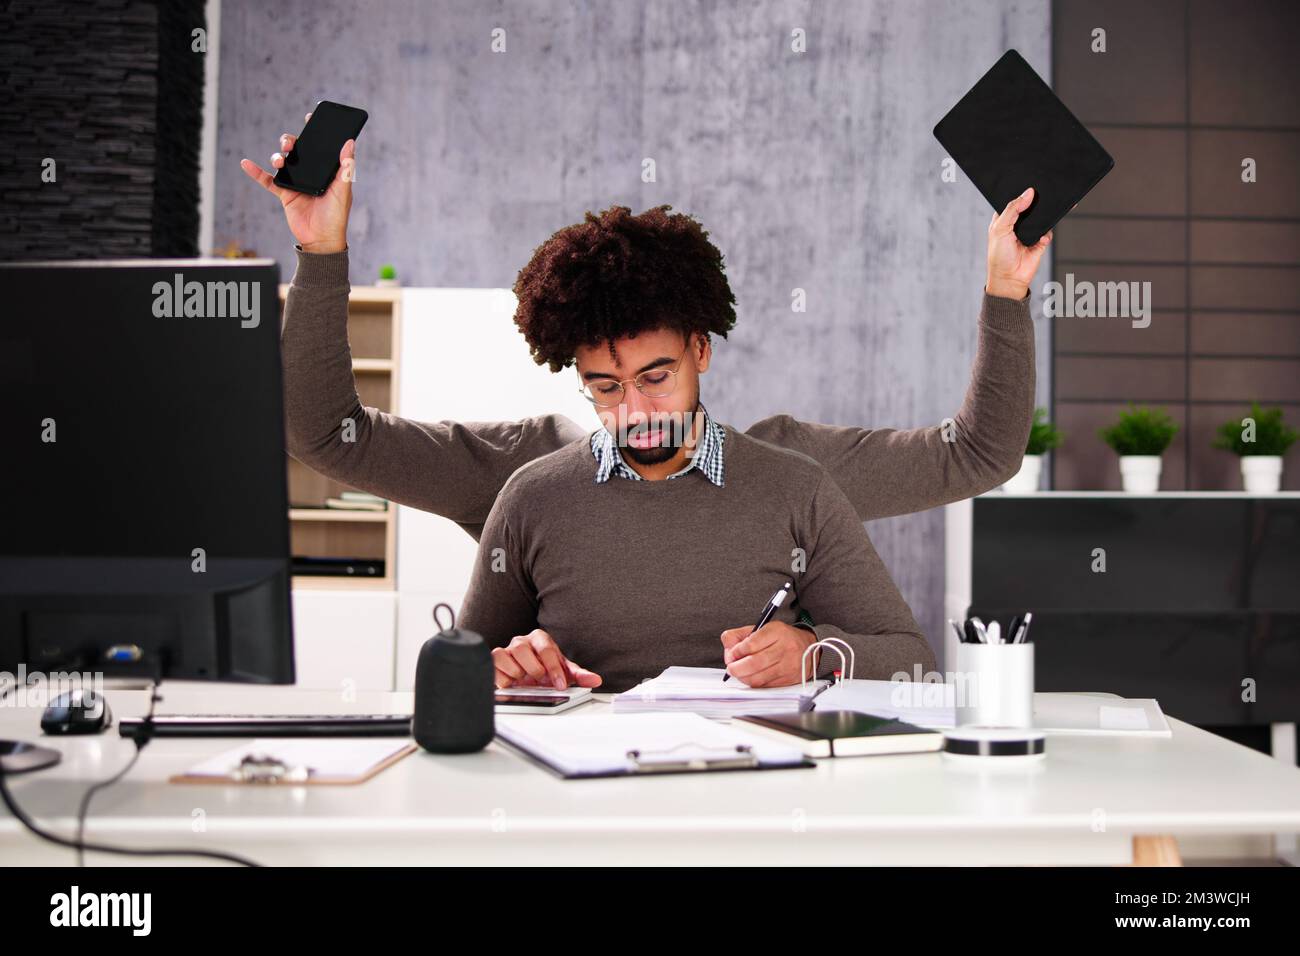 Happy Busy Business Man Multitasking. Employee Workload Stock Photo